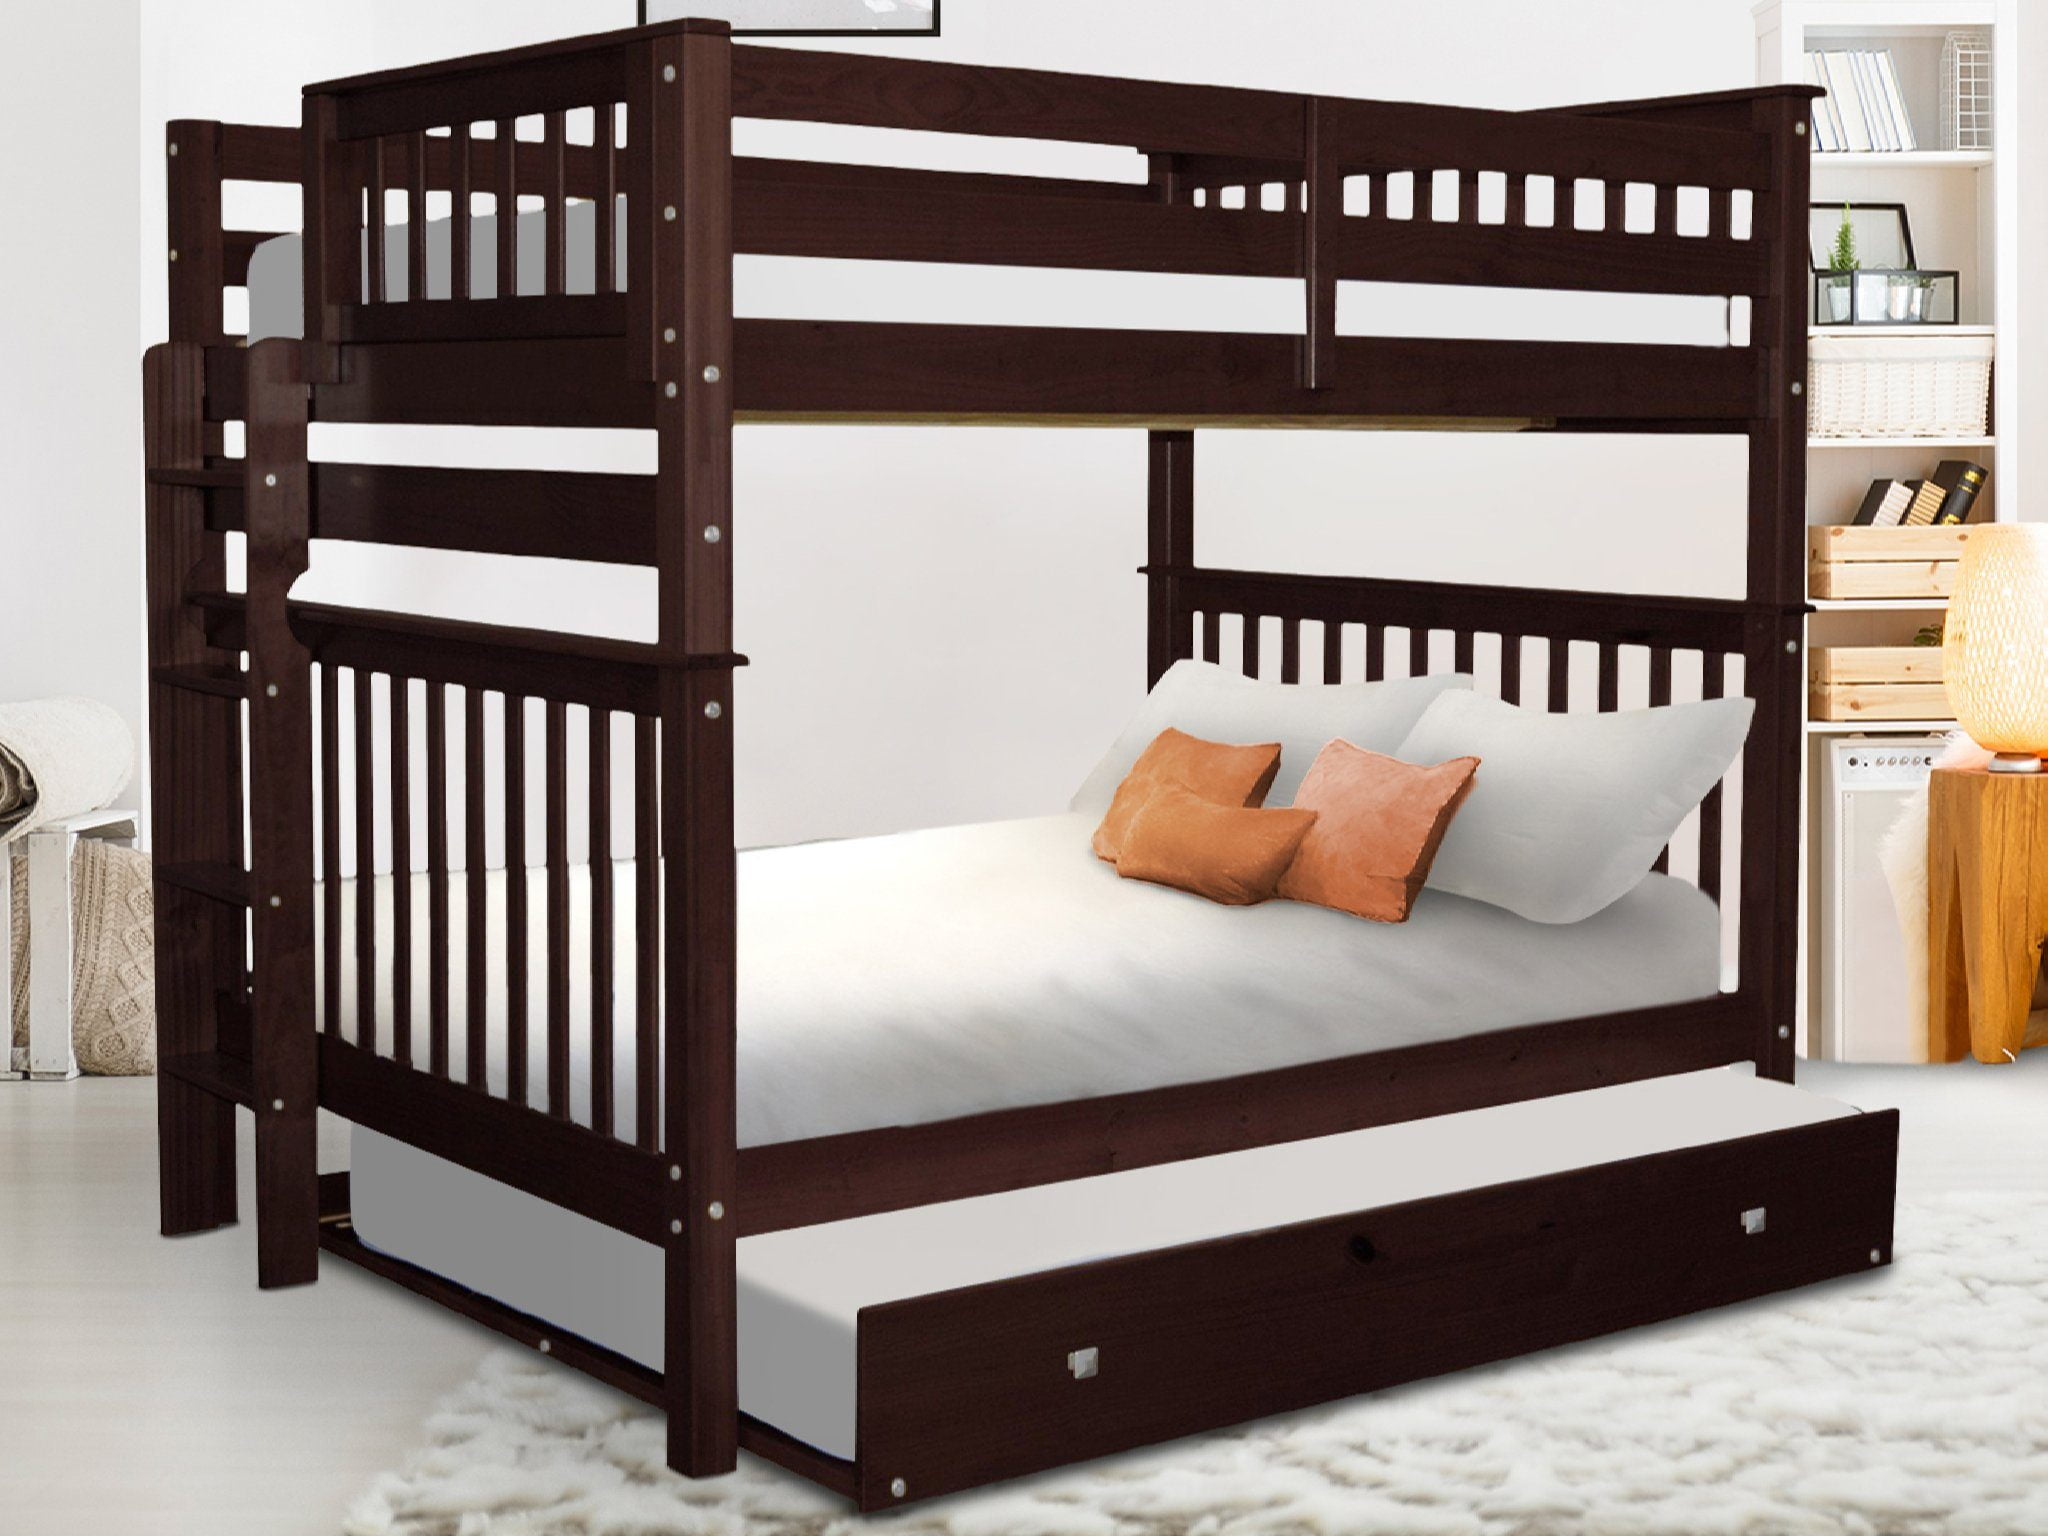 Twin XL Over King Adult Bunk Bed (Charcoal)